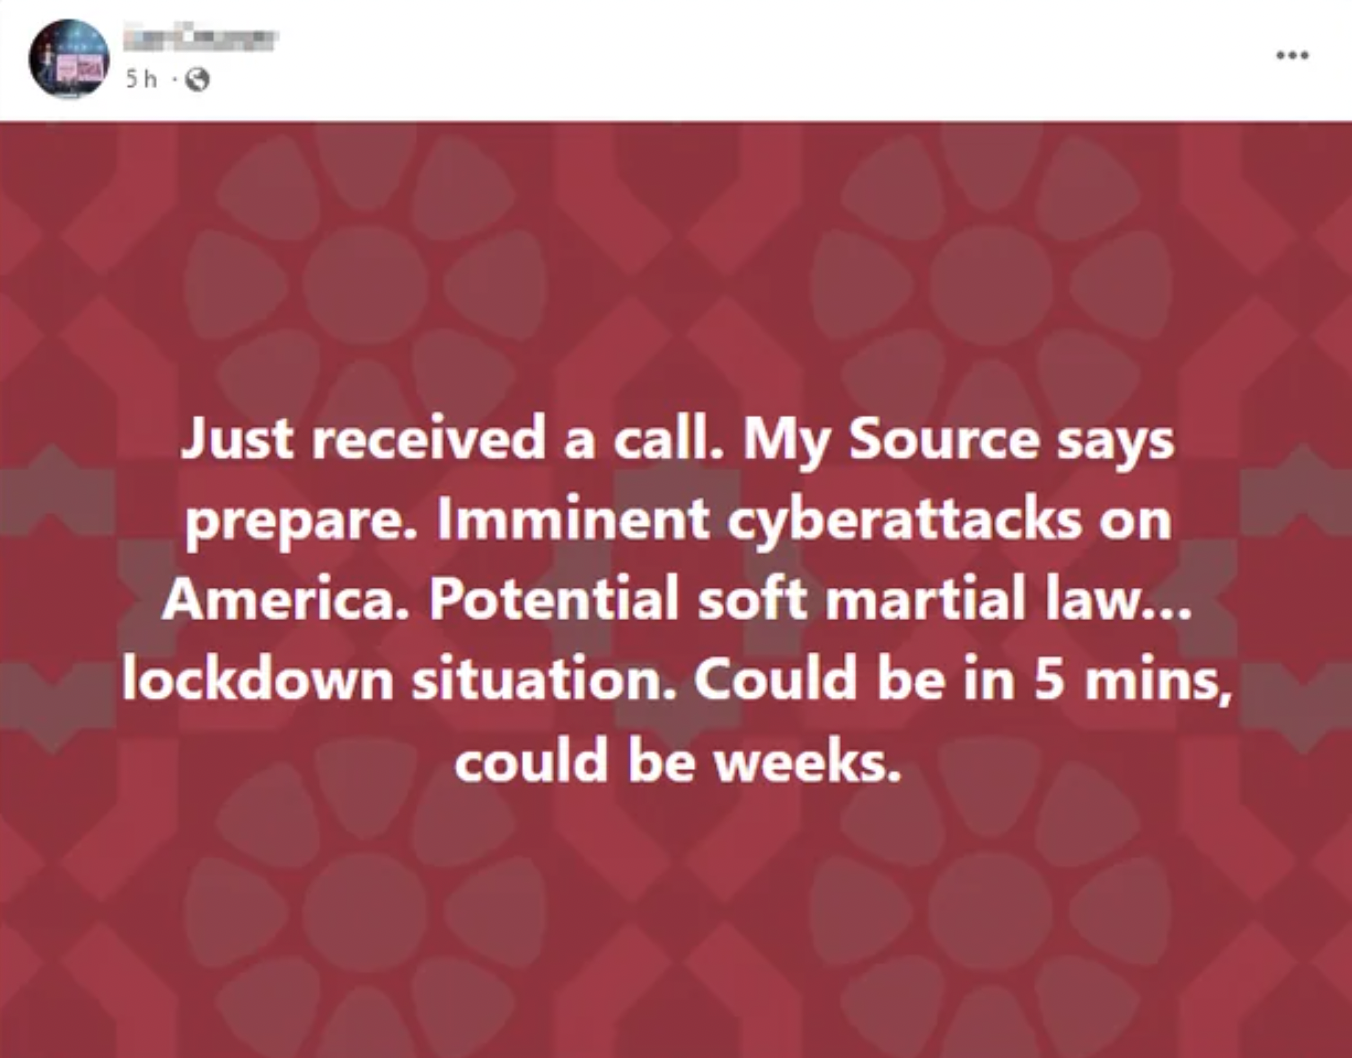 insane people on facebook - pattern - 5h6 Just received a call. My Source says prepare. Imminent cyberattacks on America. Potential soft martial law... lockdown situation. Could be in 5 mins, could be weeks. www